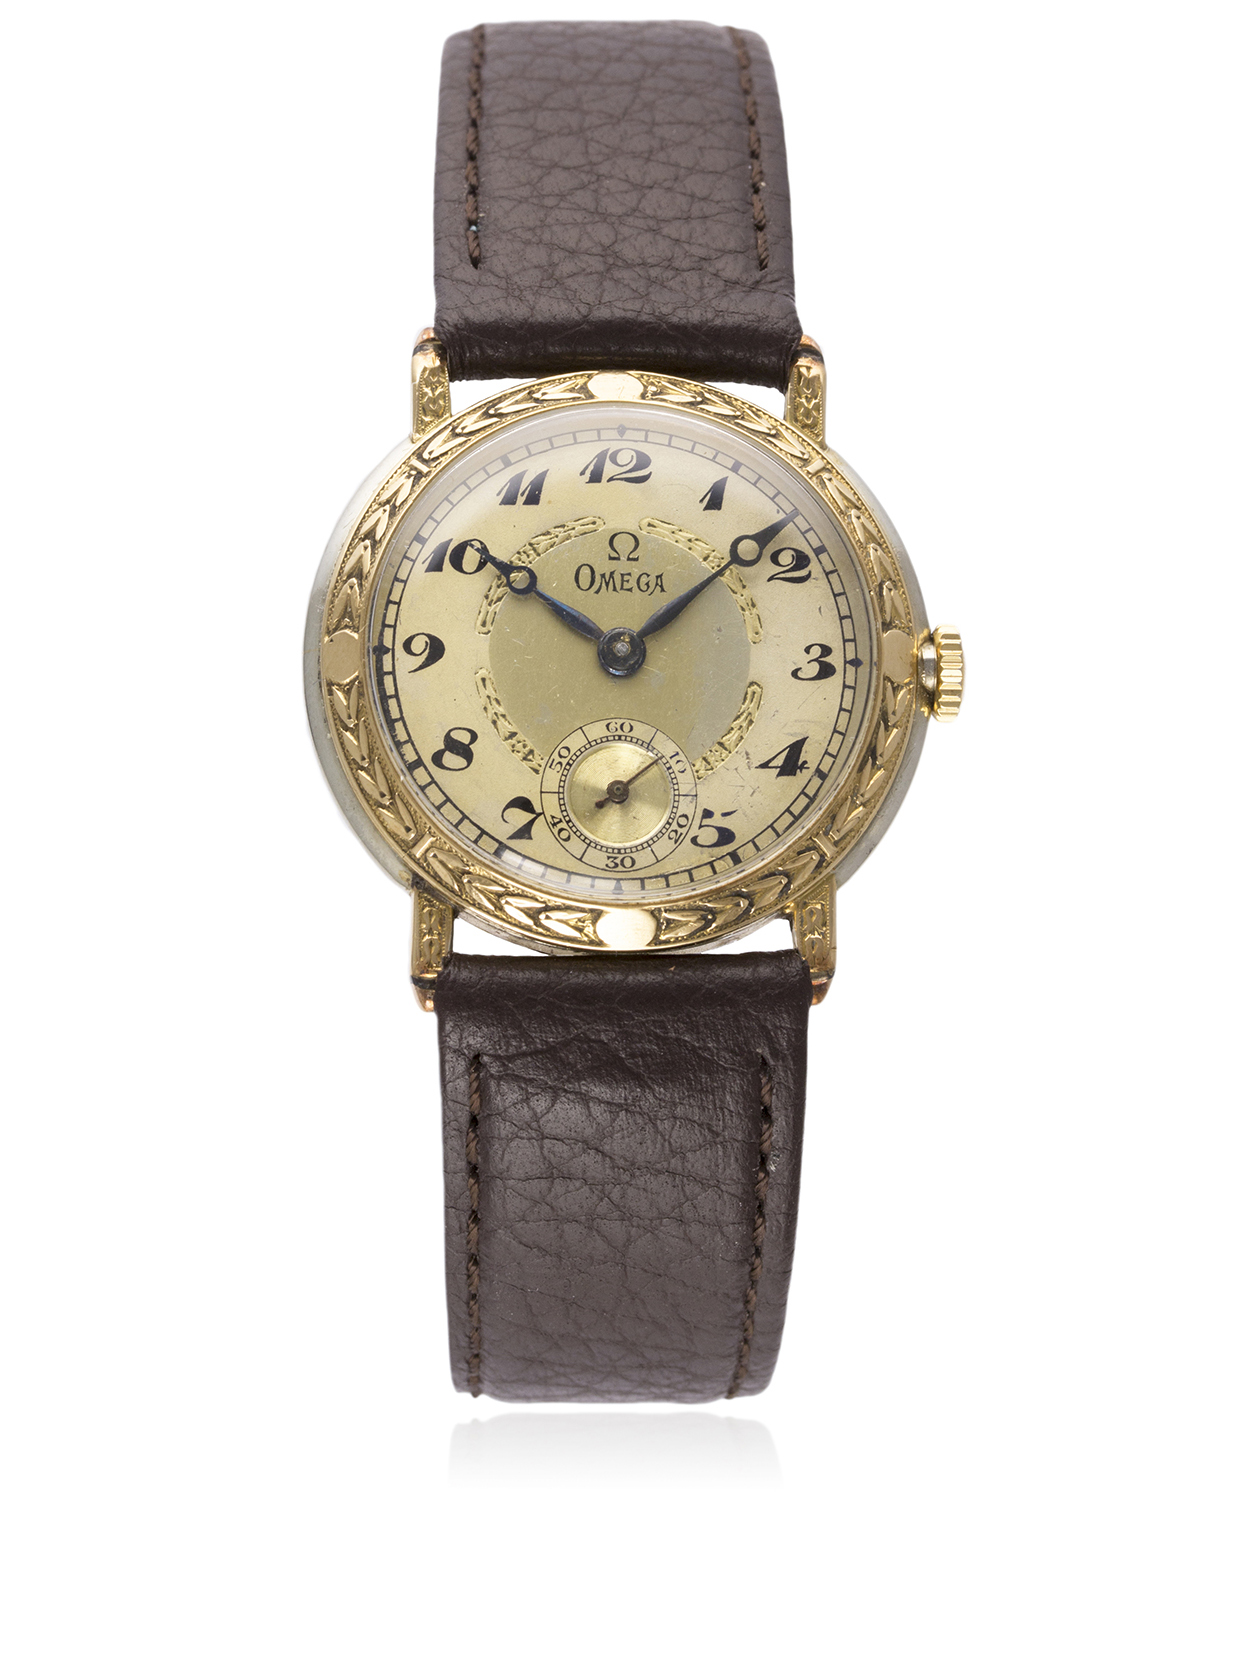 A RARE GENTLEMAN`S 18K SOLID WHITE & YELLOW GOLD OMEGA WRIST WATCH DATED 1924, REF. OT 5009 WITH